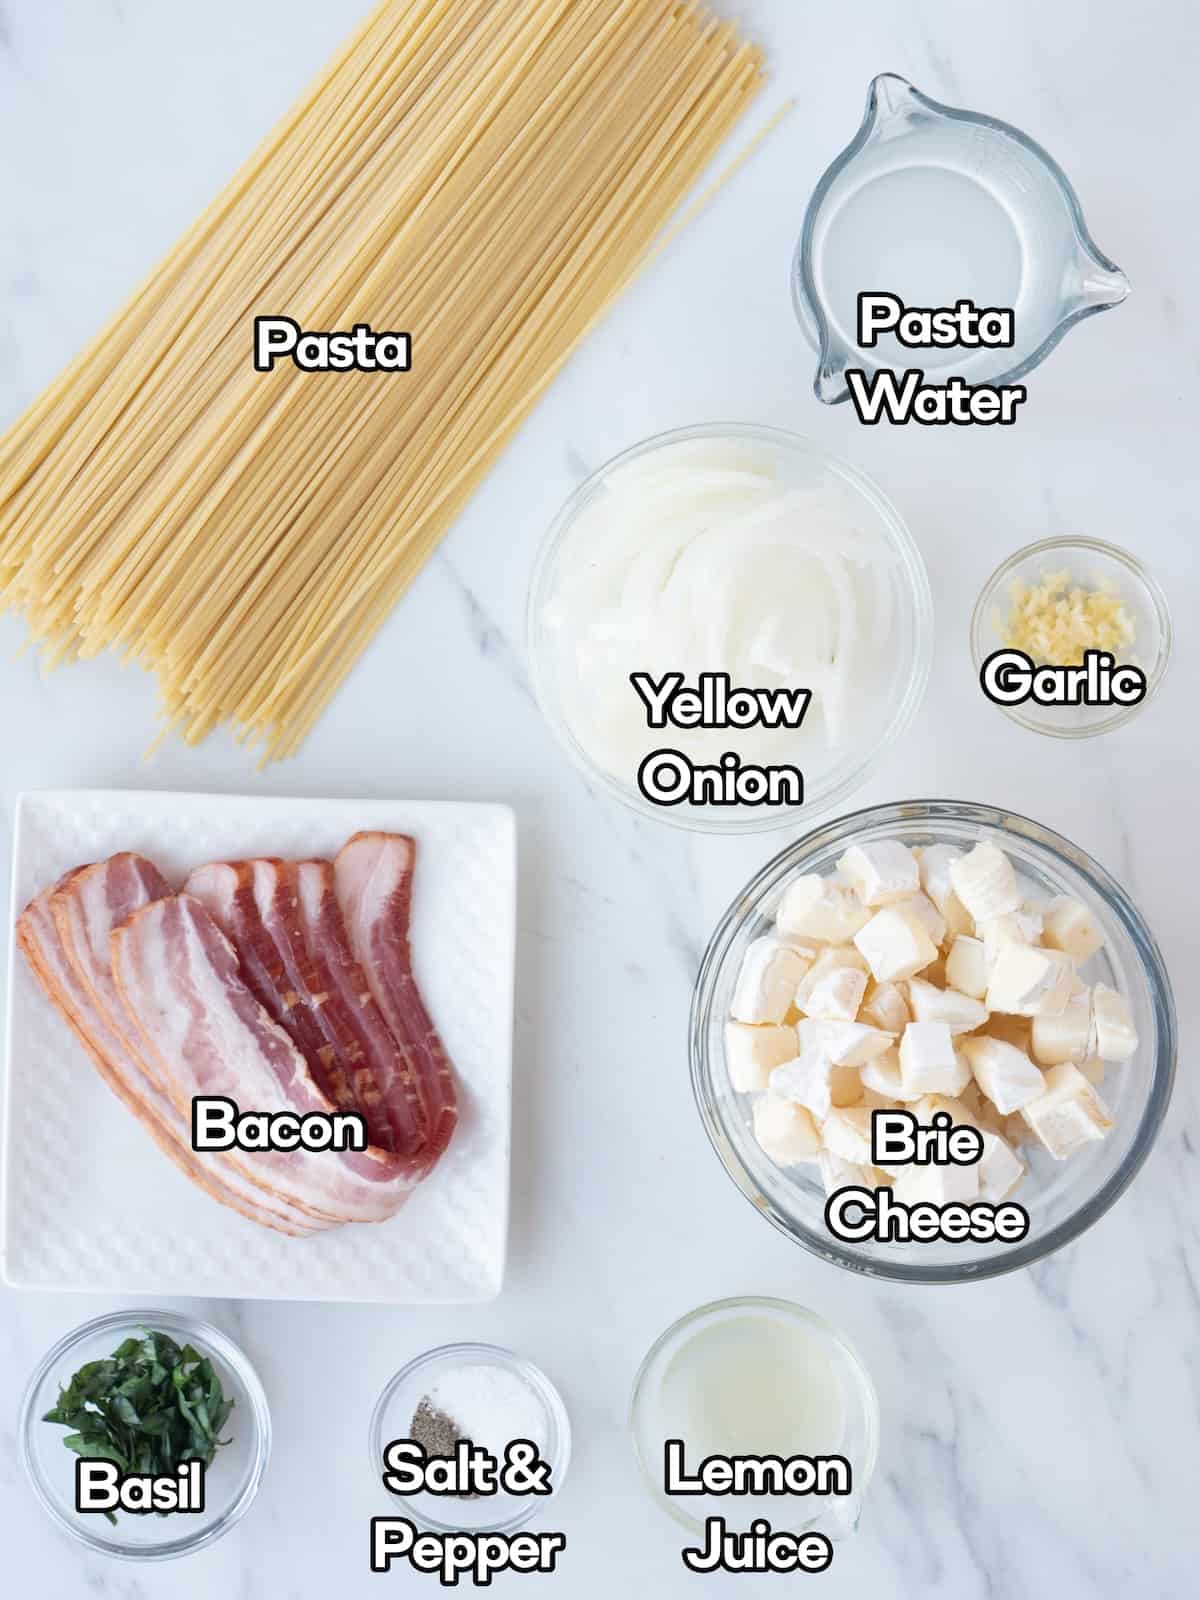 Mise-en-place of all the ingredients to make brie, bacon and basil pasta.